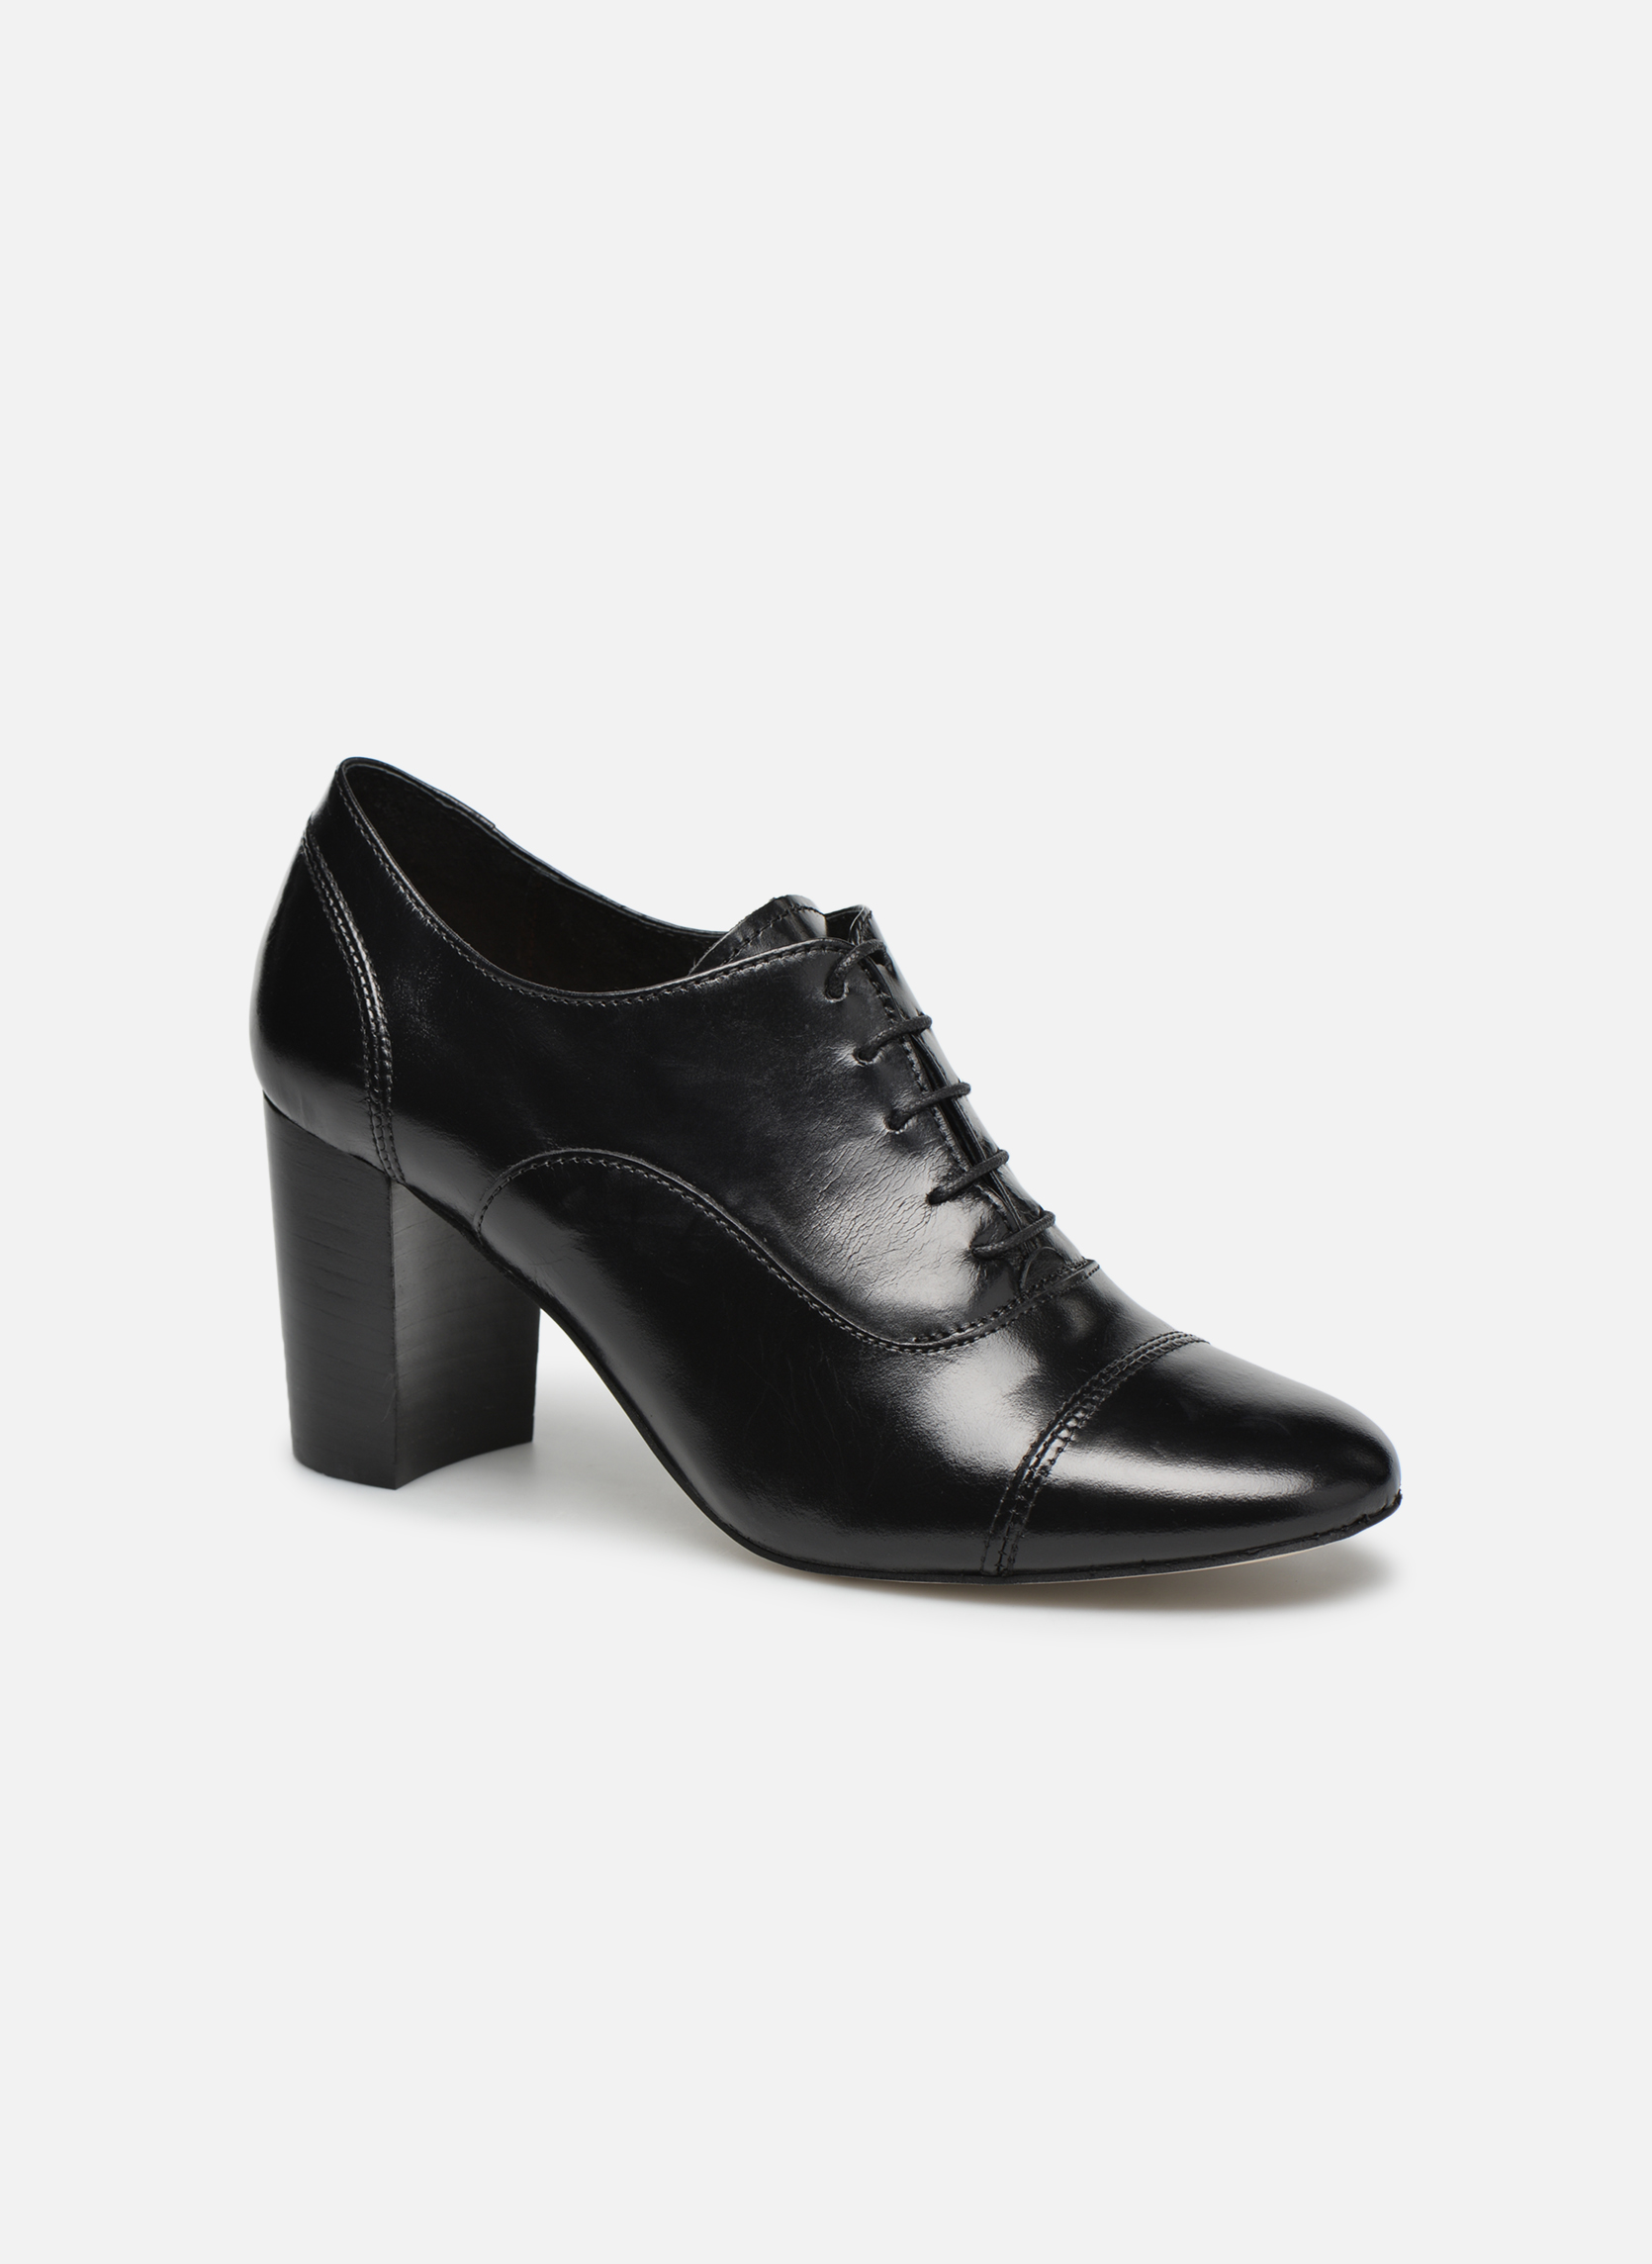 Jonak Beatles Ankle boots in Black at Sarenza.co.uk (202360)